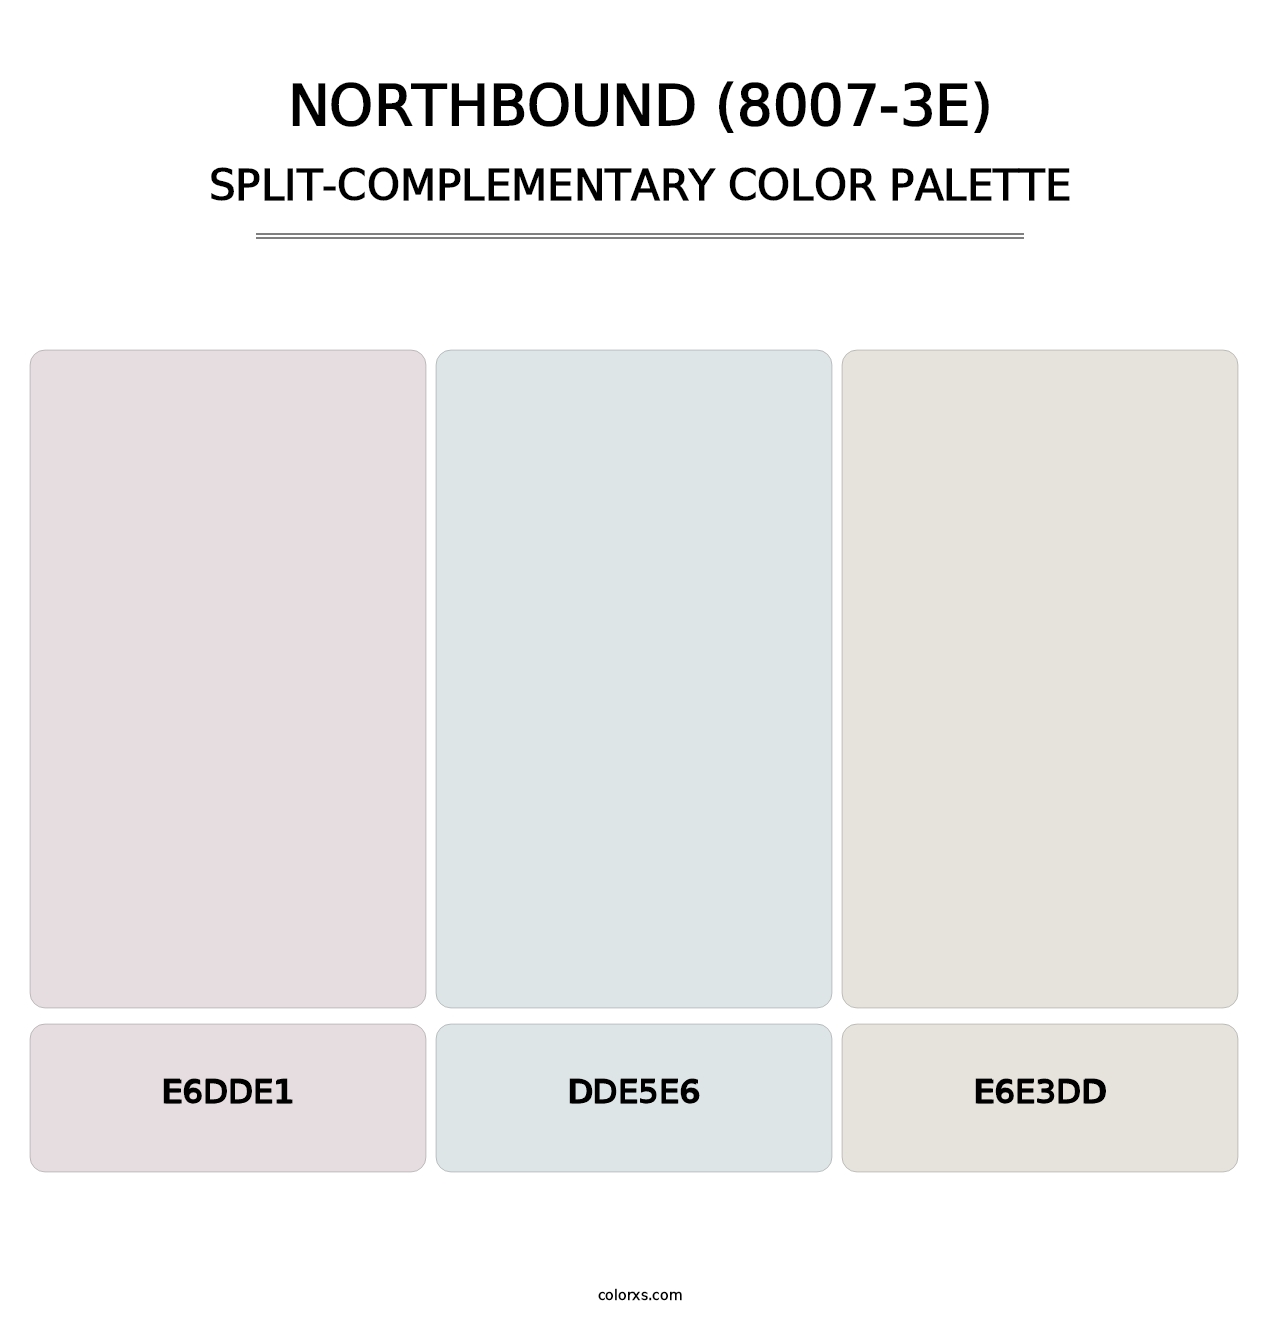 Northbound (8007-3E) - Split-Complementary Color Palette